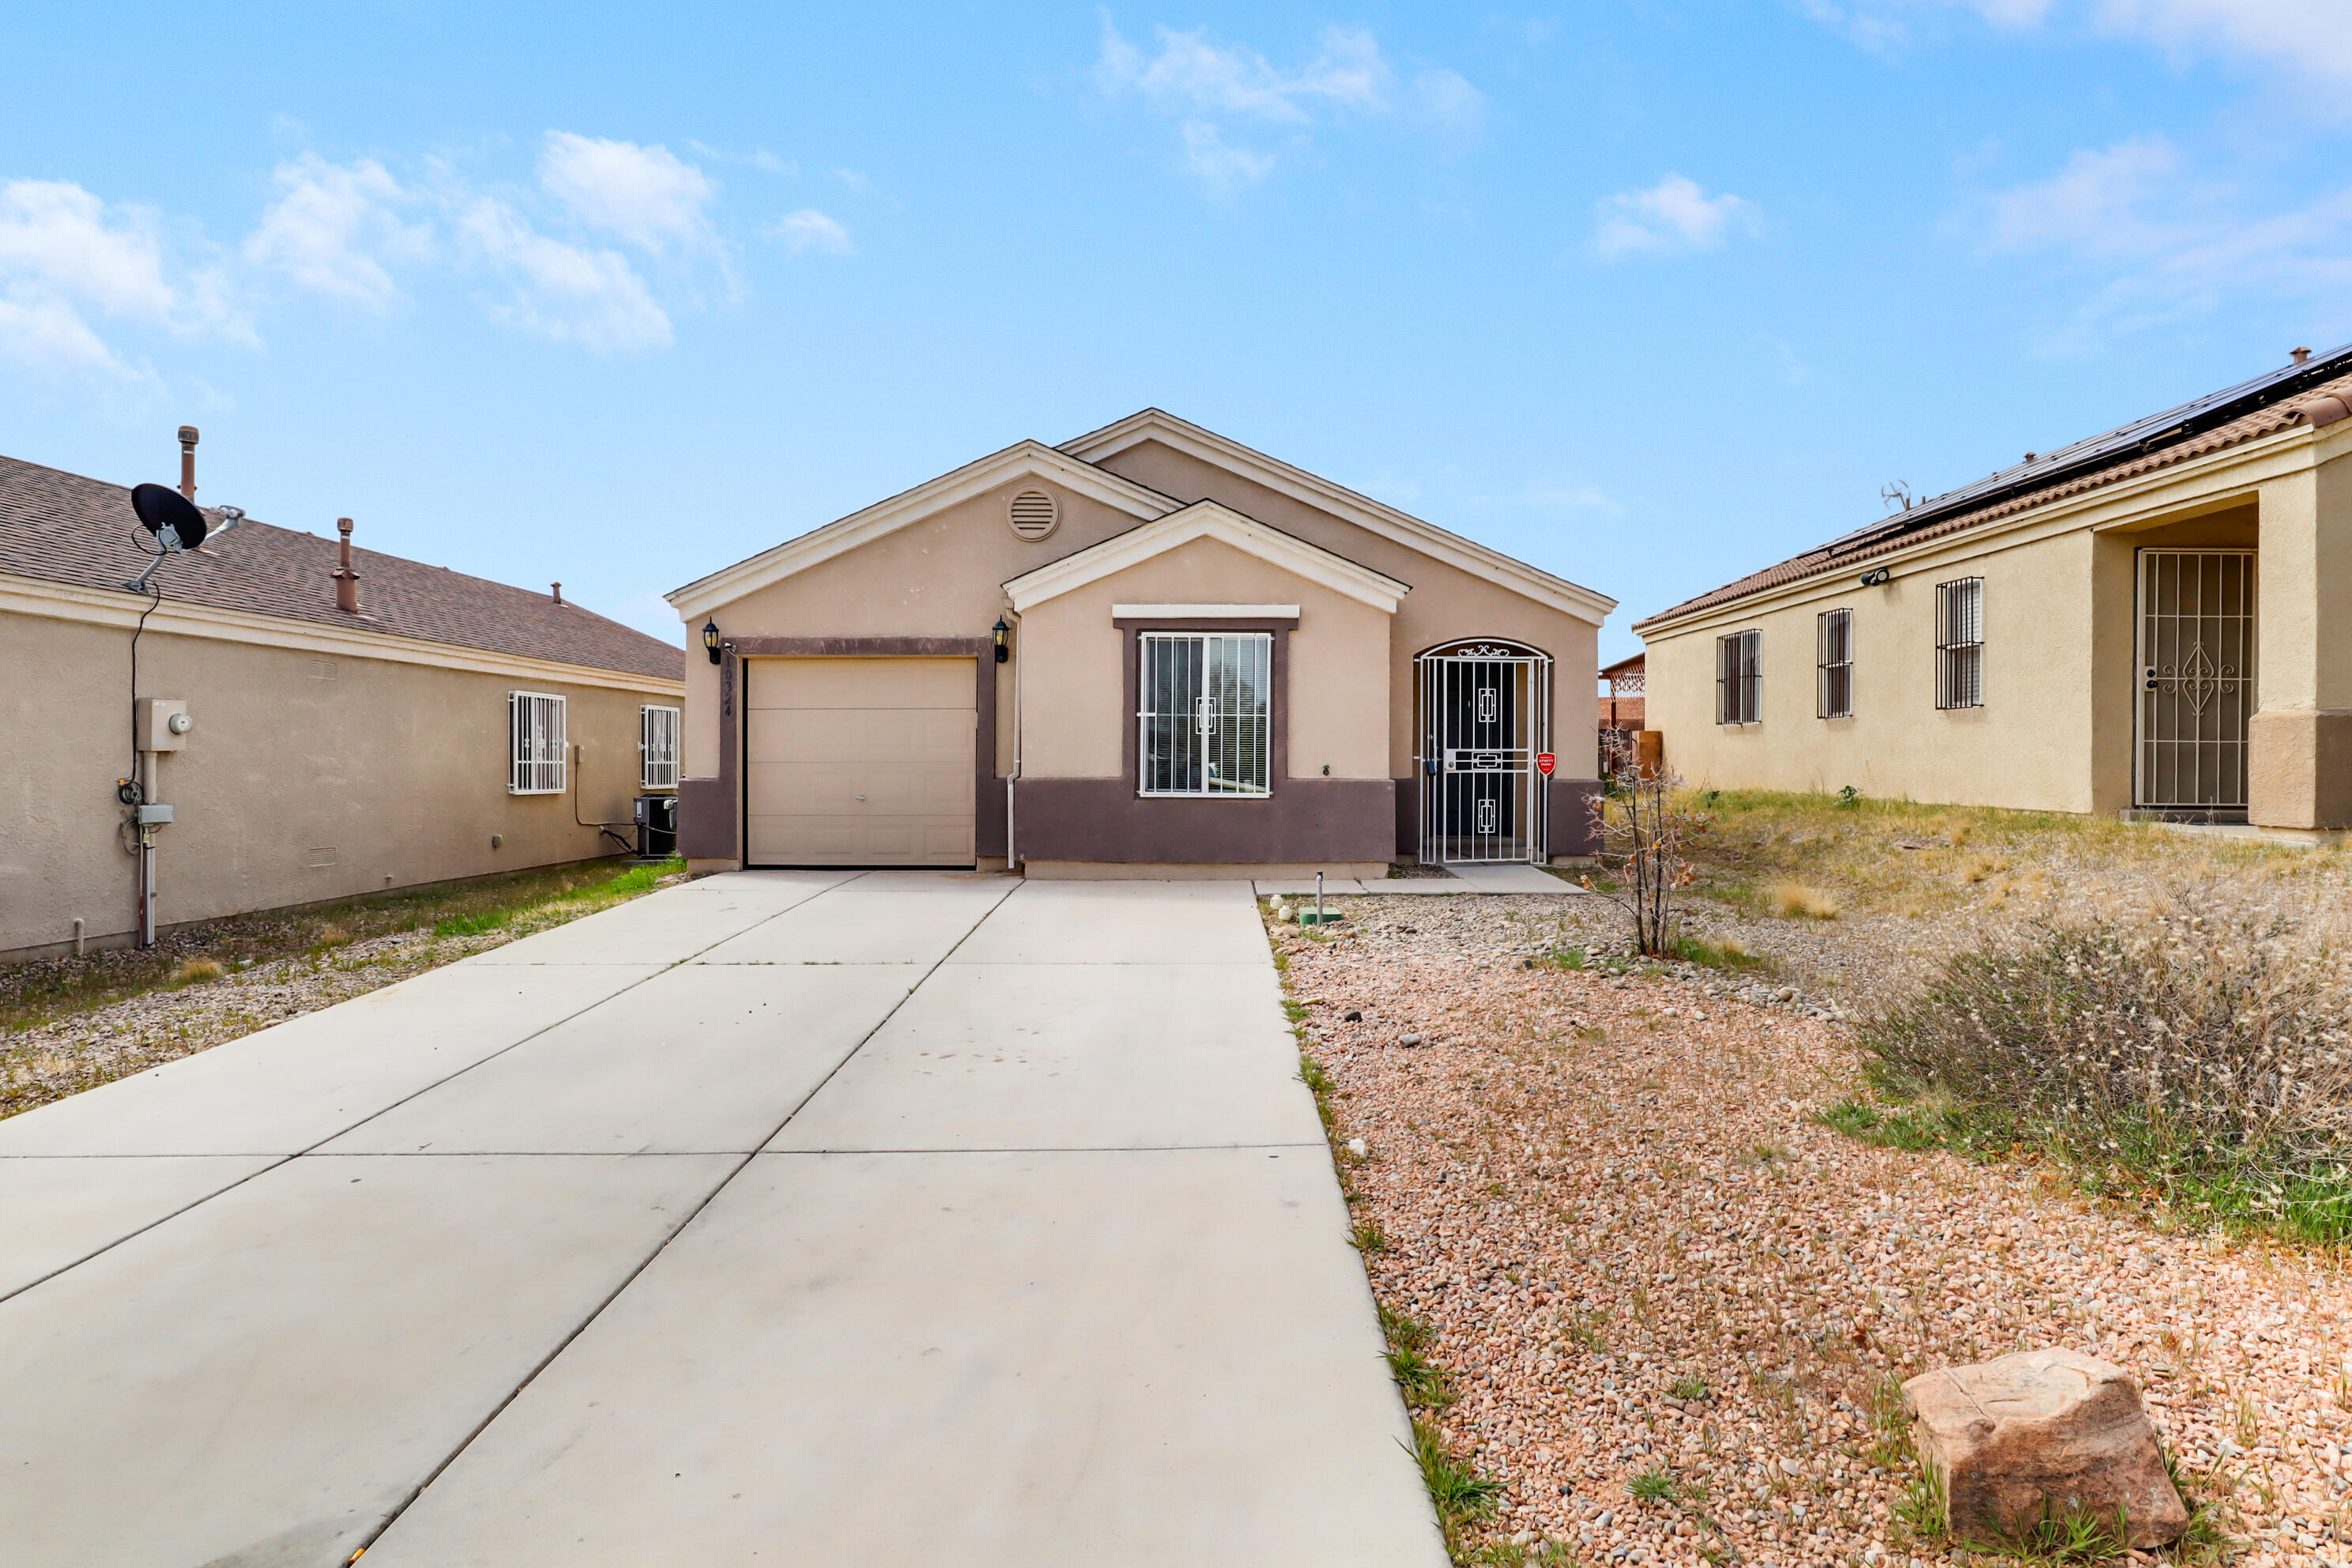 Welcome to this cozy HOME. 3 Bedroom 2 Bathroom and 1 car garage.   Conveniently located near shopping centers, dining and schools.  New Appliances, new flooring throughout the home. Proud owner very well keep.  Ready to make it your own.